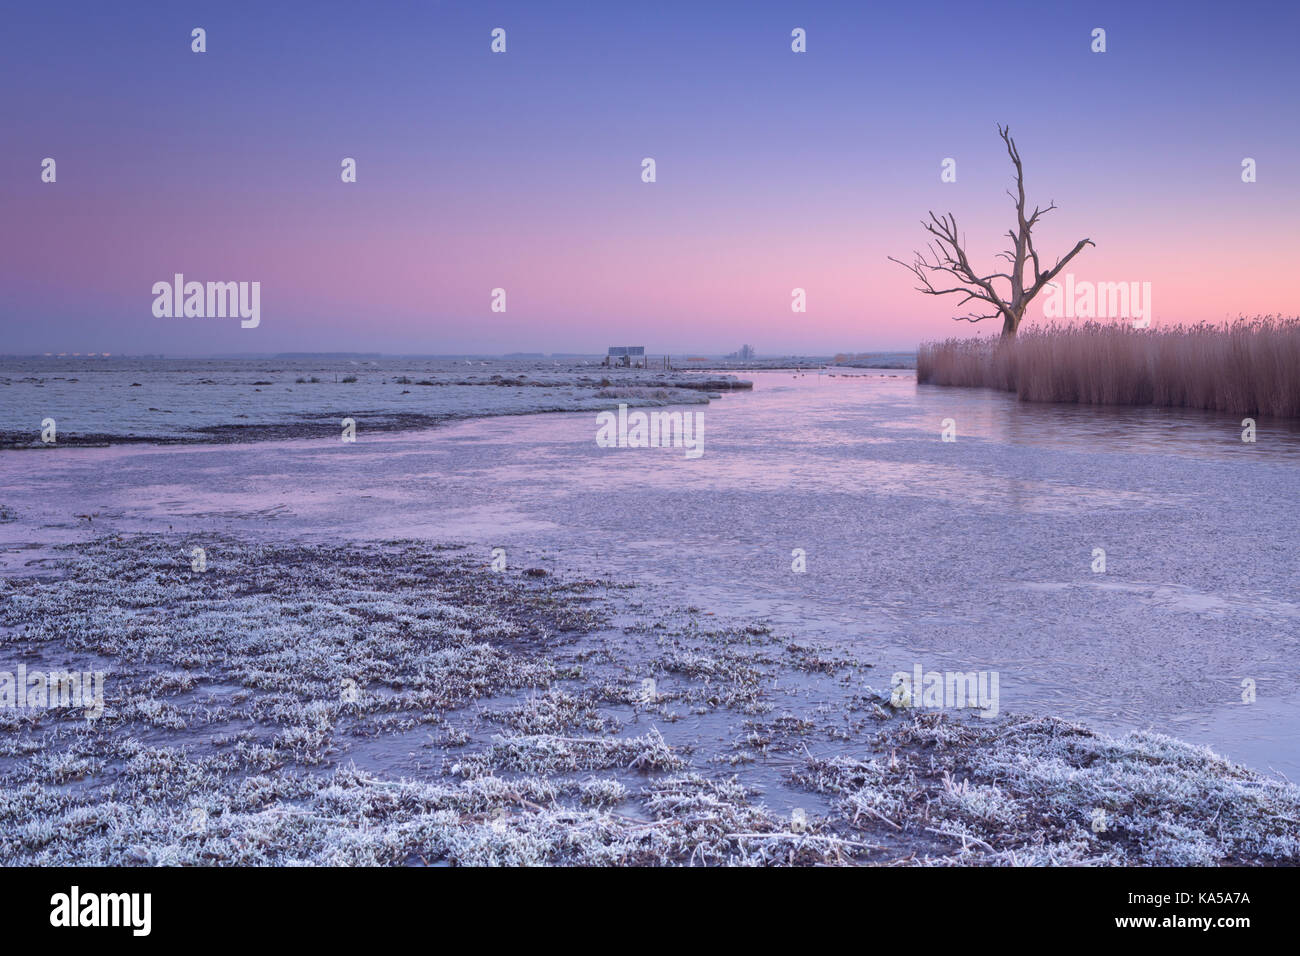 Winter in a Dutch polder landscape with a lonely tree at dawn. Stock Photo